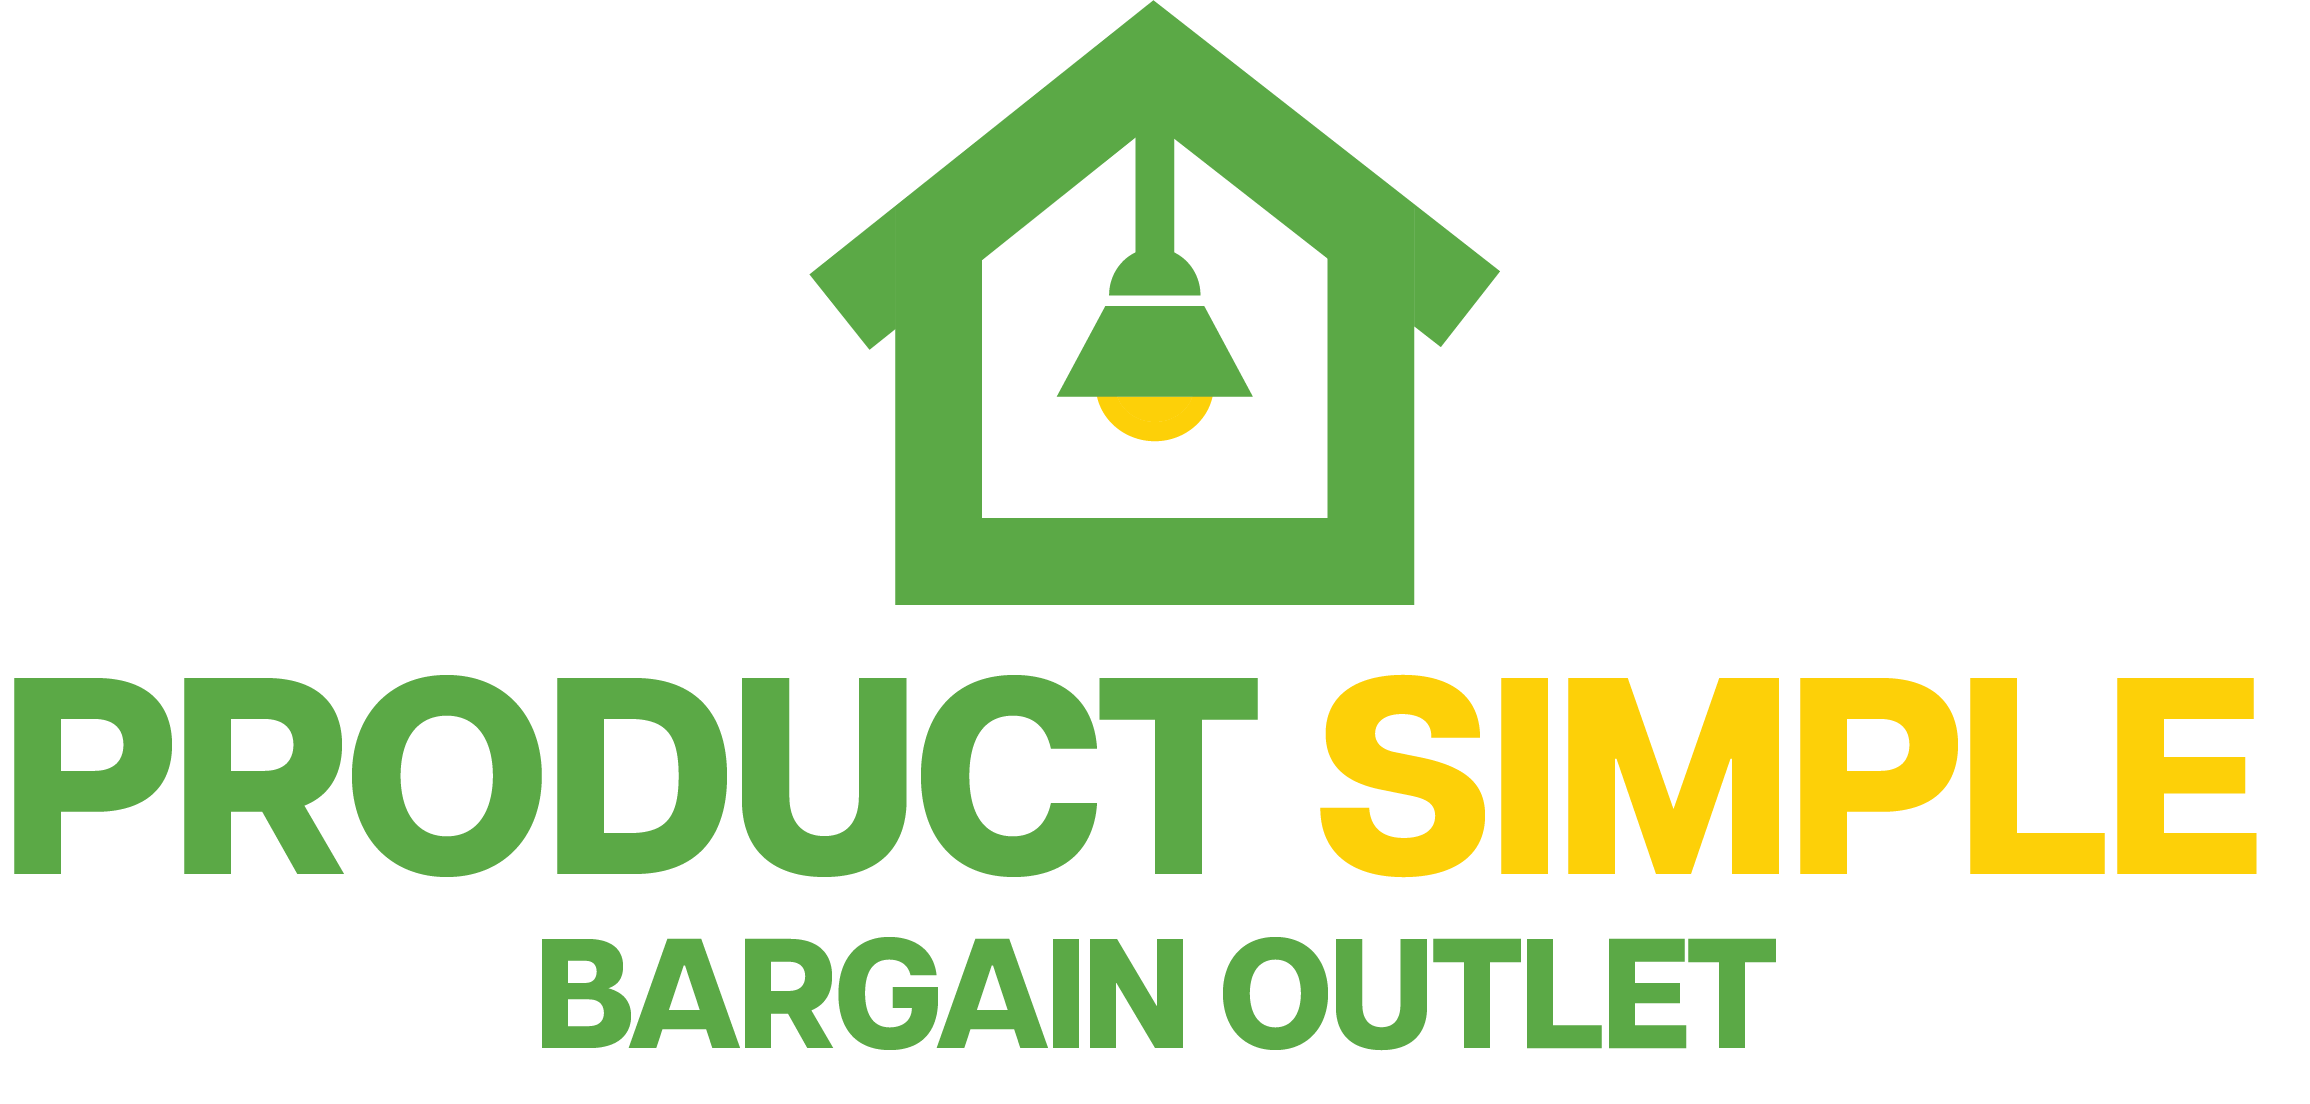 Product Simple Bargain Outlet